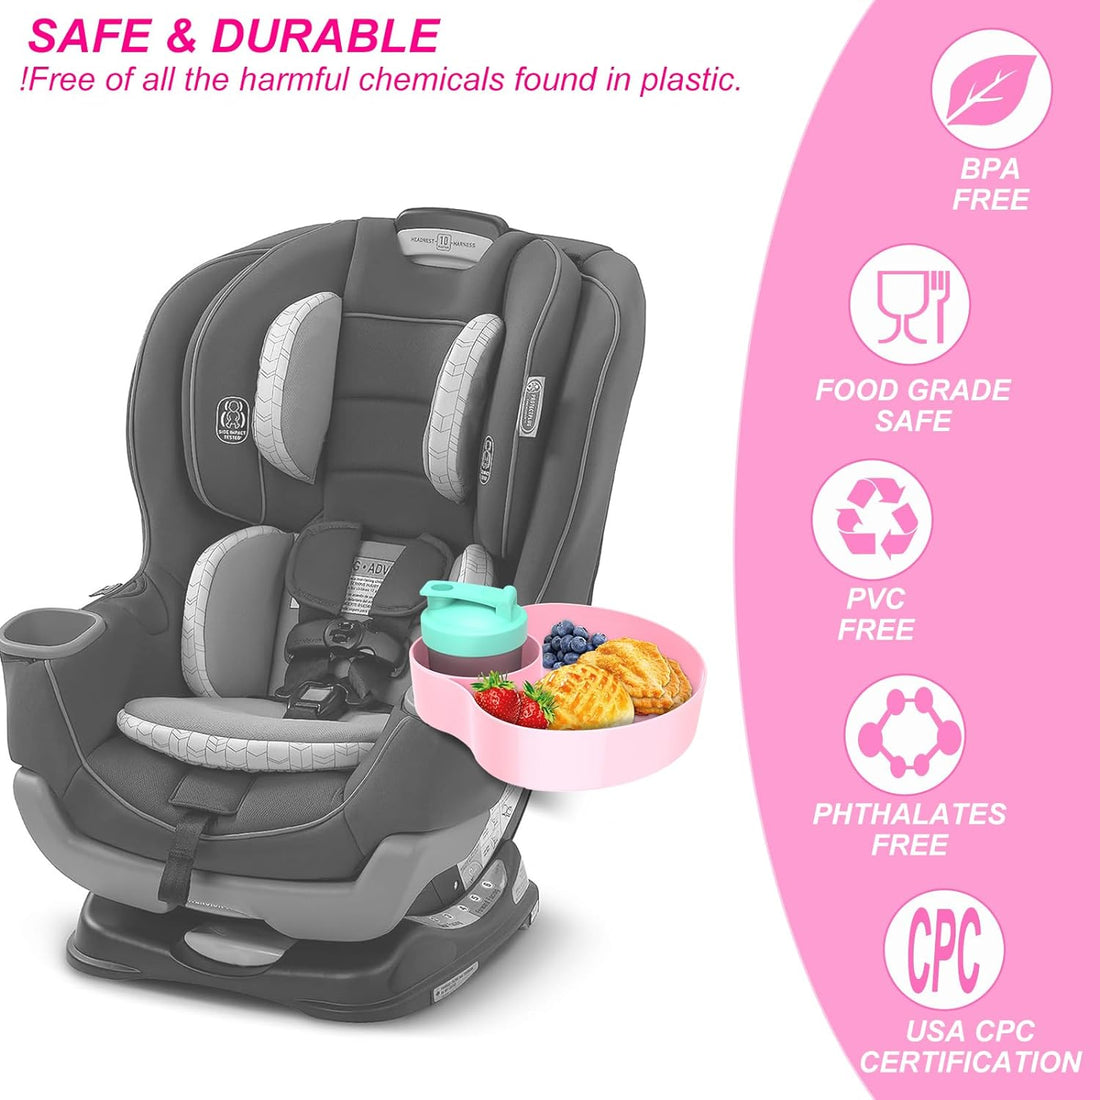 OMYPOTT Kids Car Seat Snack Tray: Travel Trays for Kids Car Cup Holder, Toddler Road Trip Essential, Travel Snacks Food Plate for Stroller, Boosters, and Anywhere with a Cup Holder -Pink